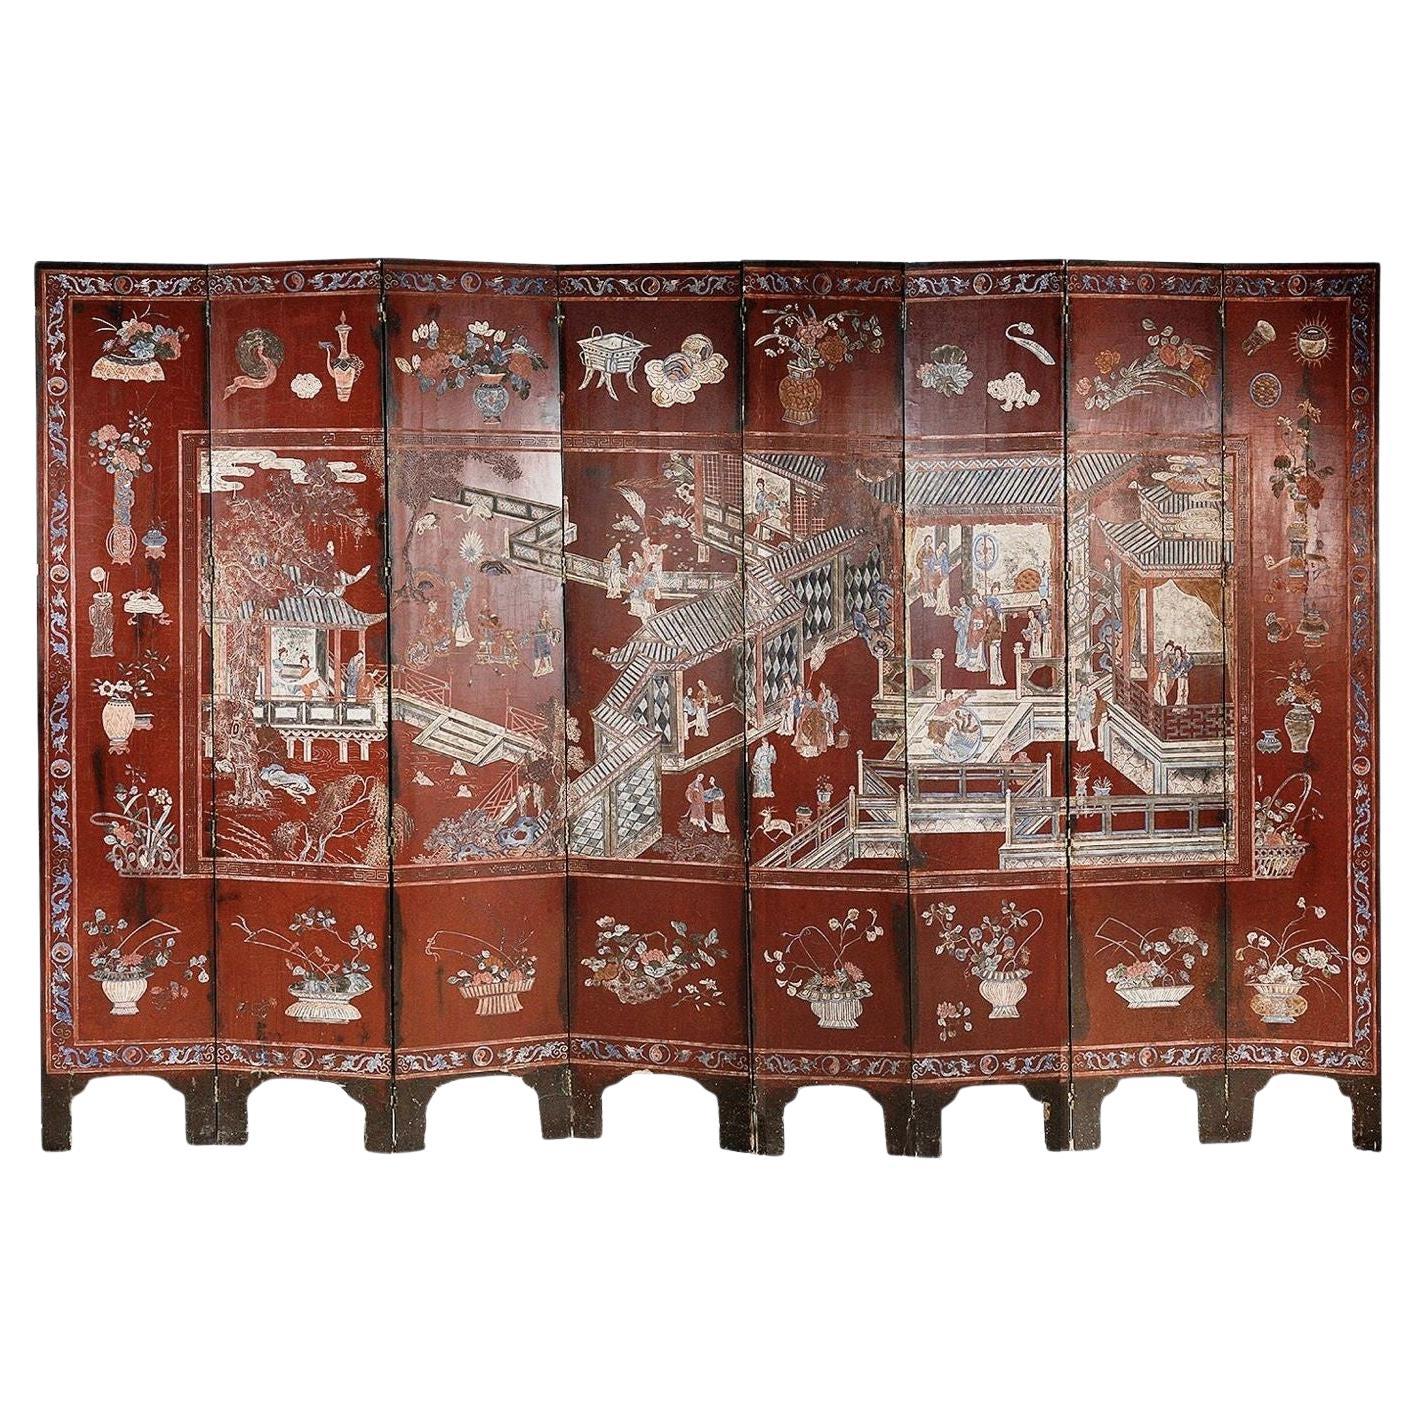 Early 19th Century Chinese Coromandel Lacquer Screen